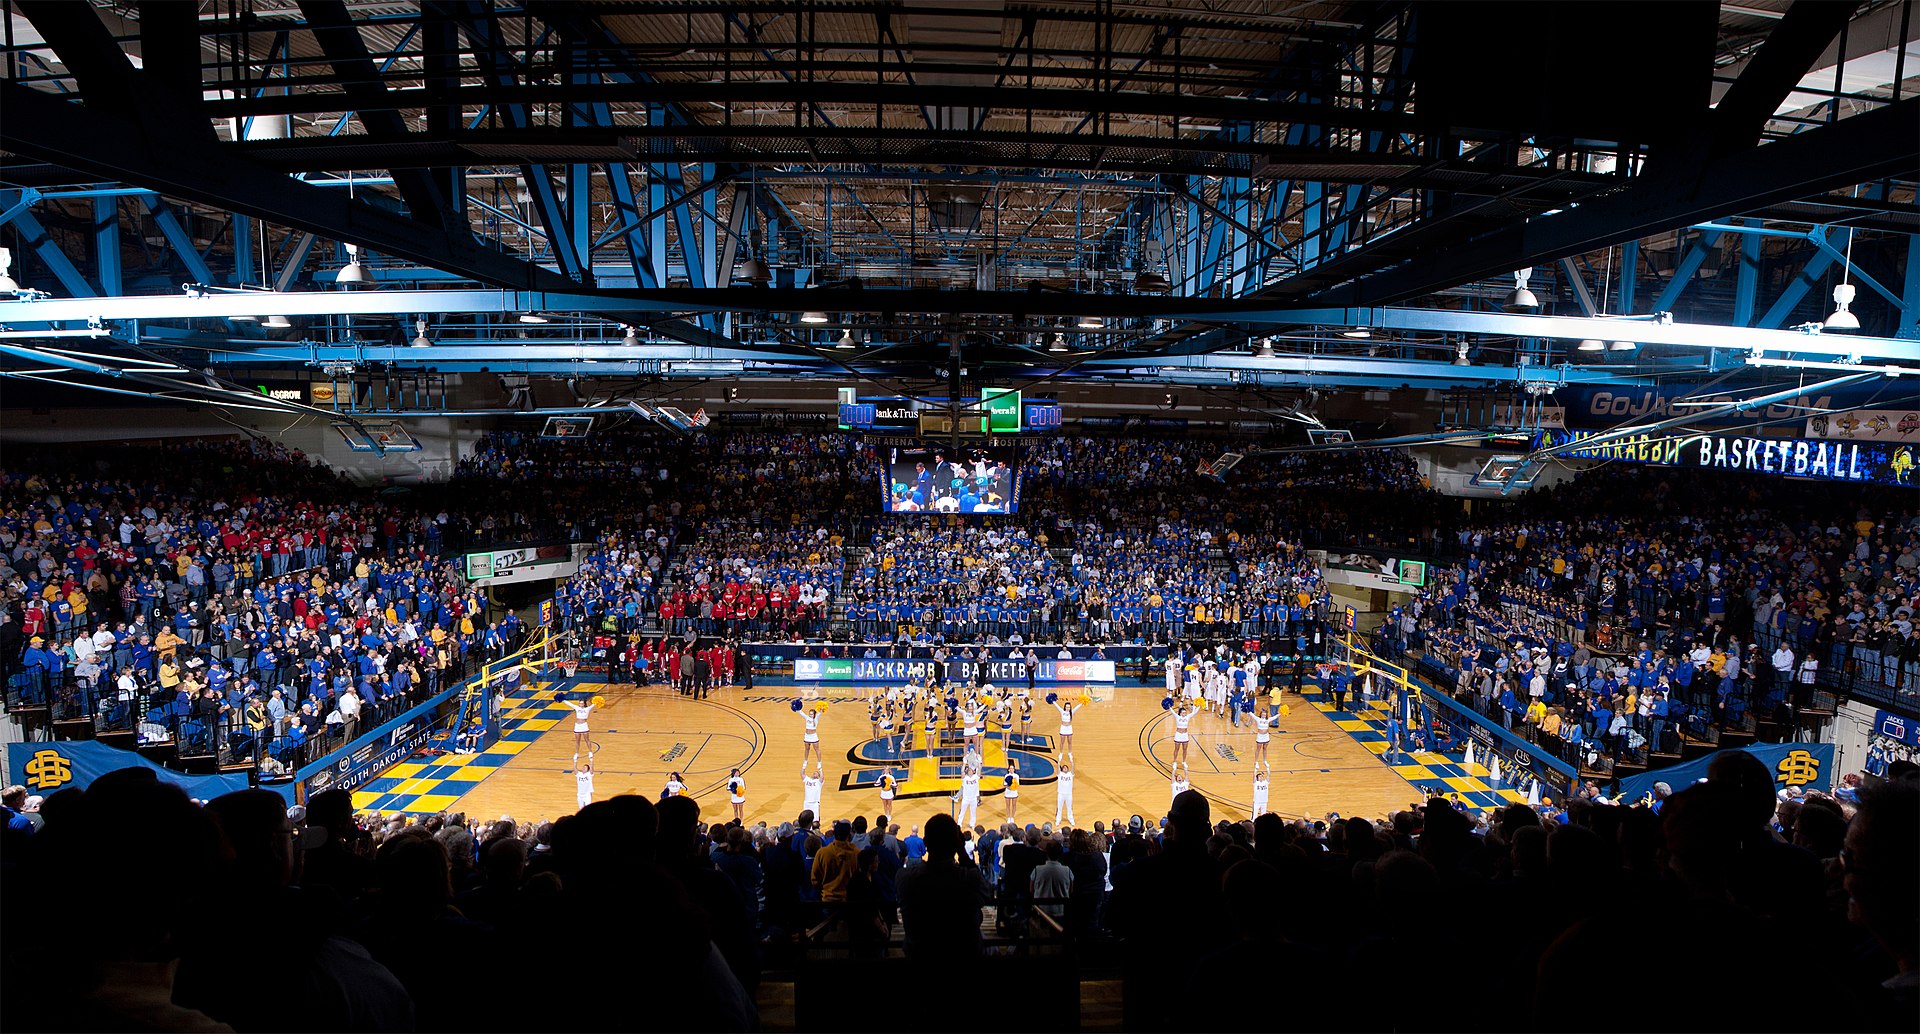 File:Seton Hall basketball at the Prudential Center.jpg - Wikipedia